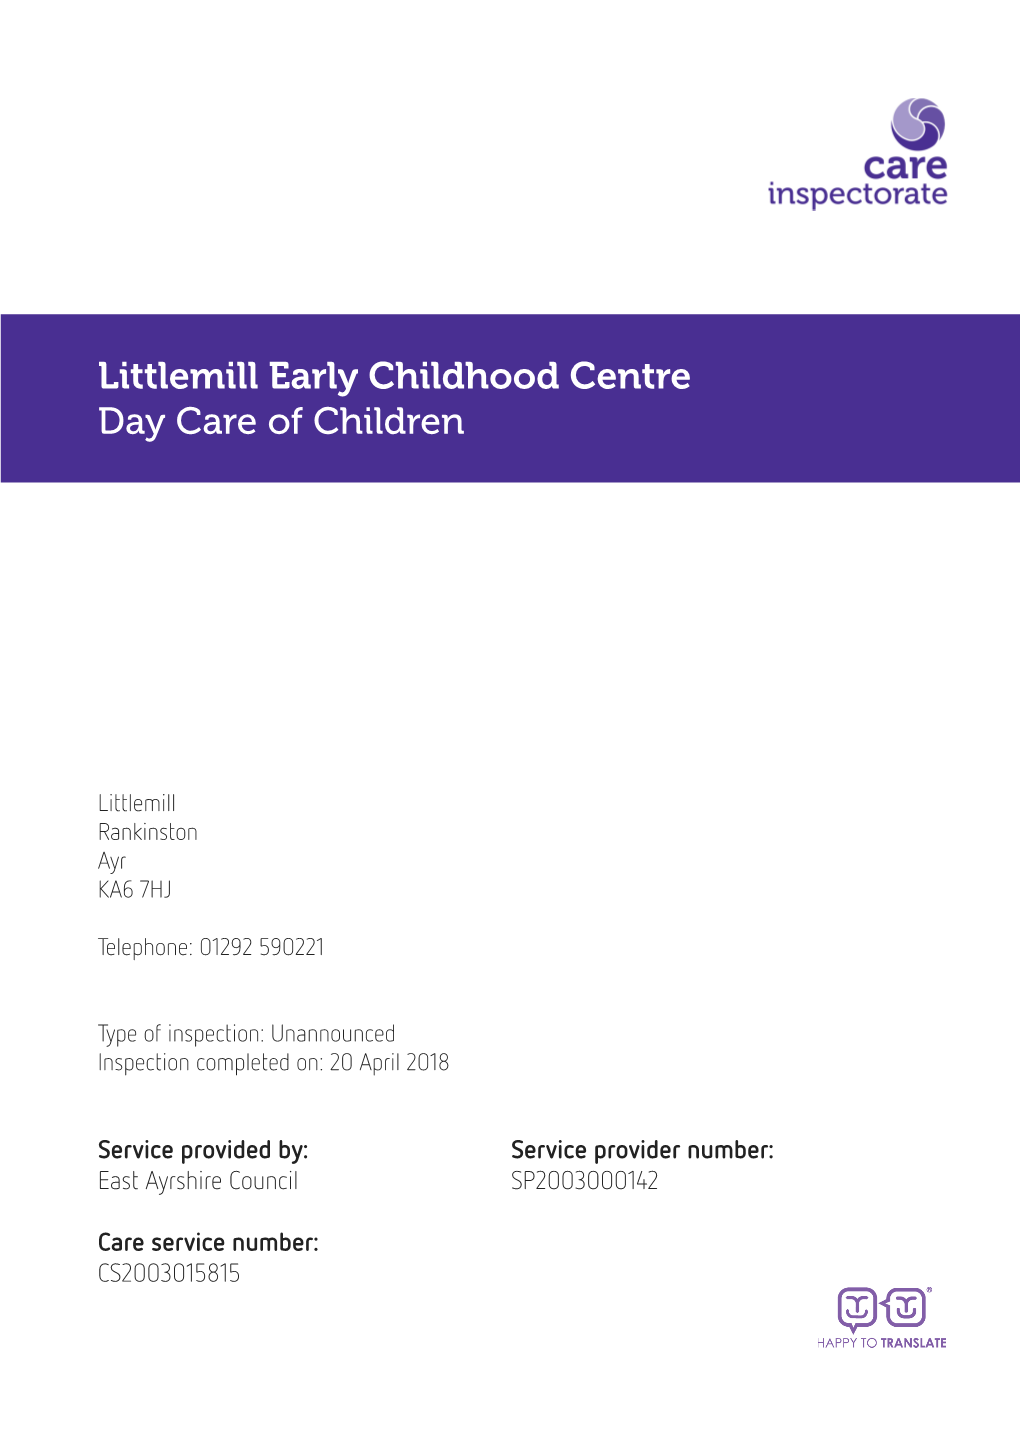 Littlemill Early Childhood Centre Day Care of Children